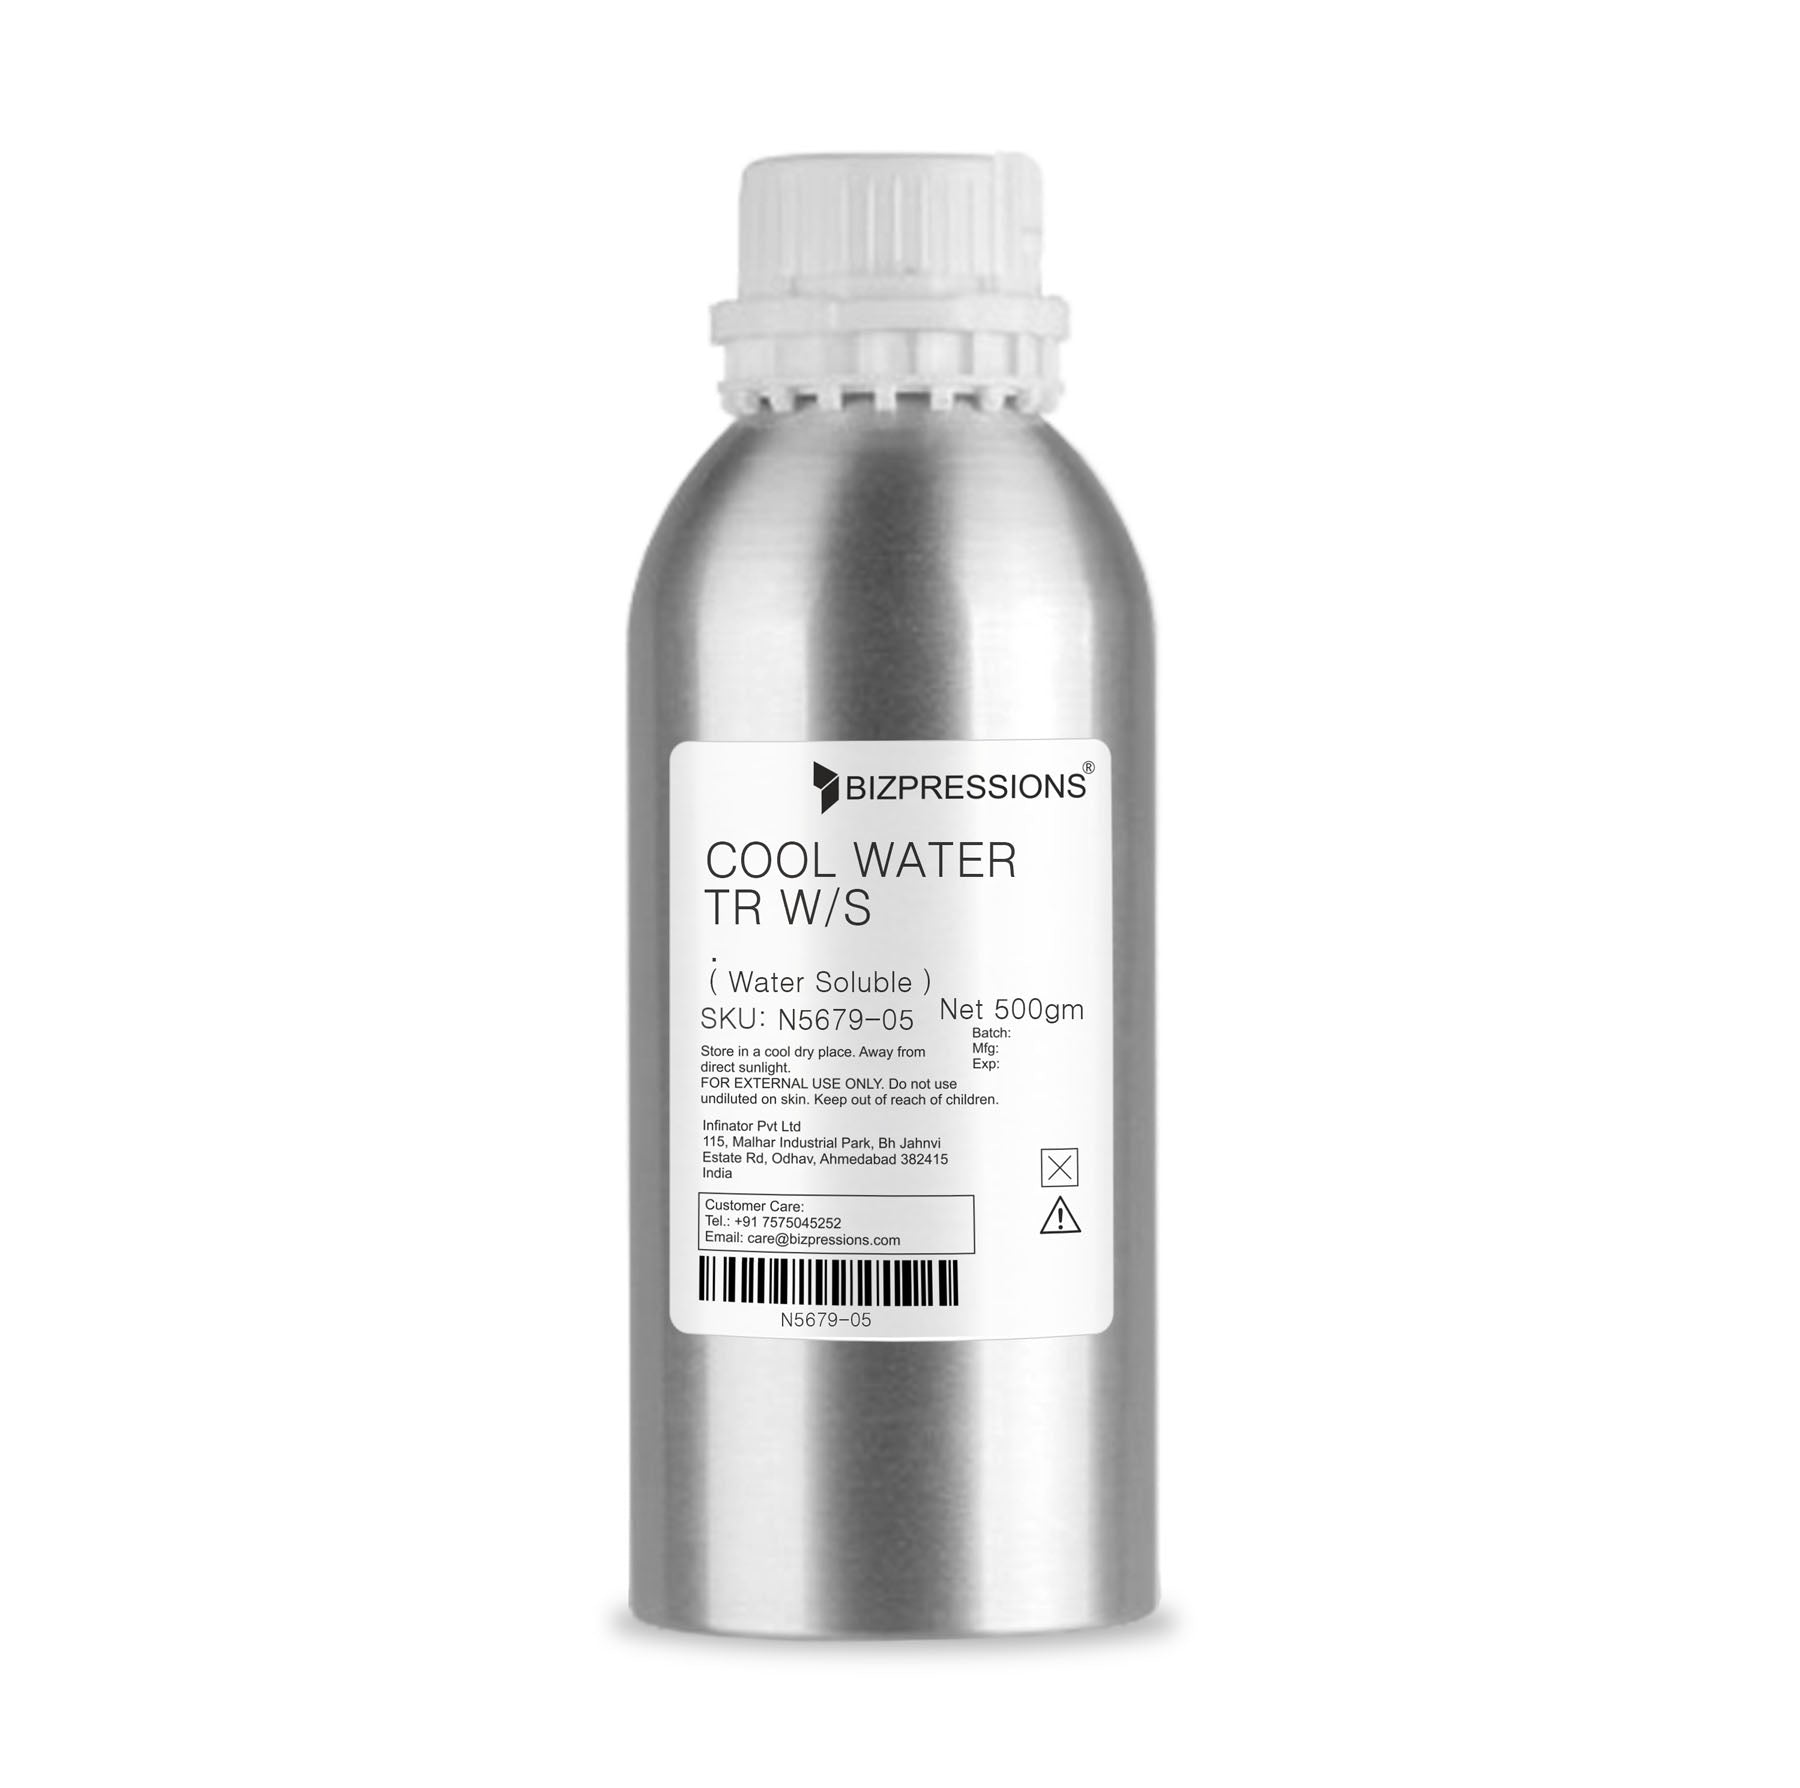 COOL WATER TR W/S - Fragrance ( Water Soluble ) - 500 gm